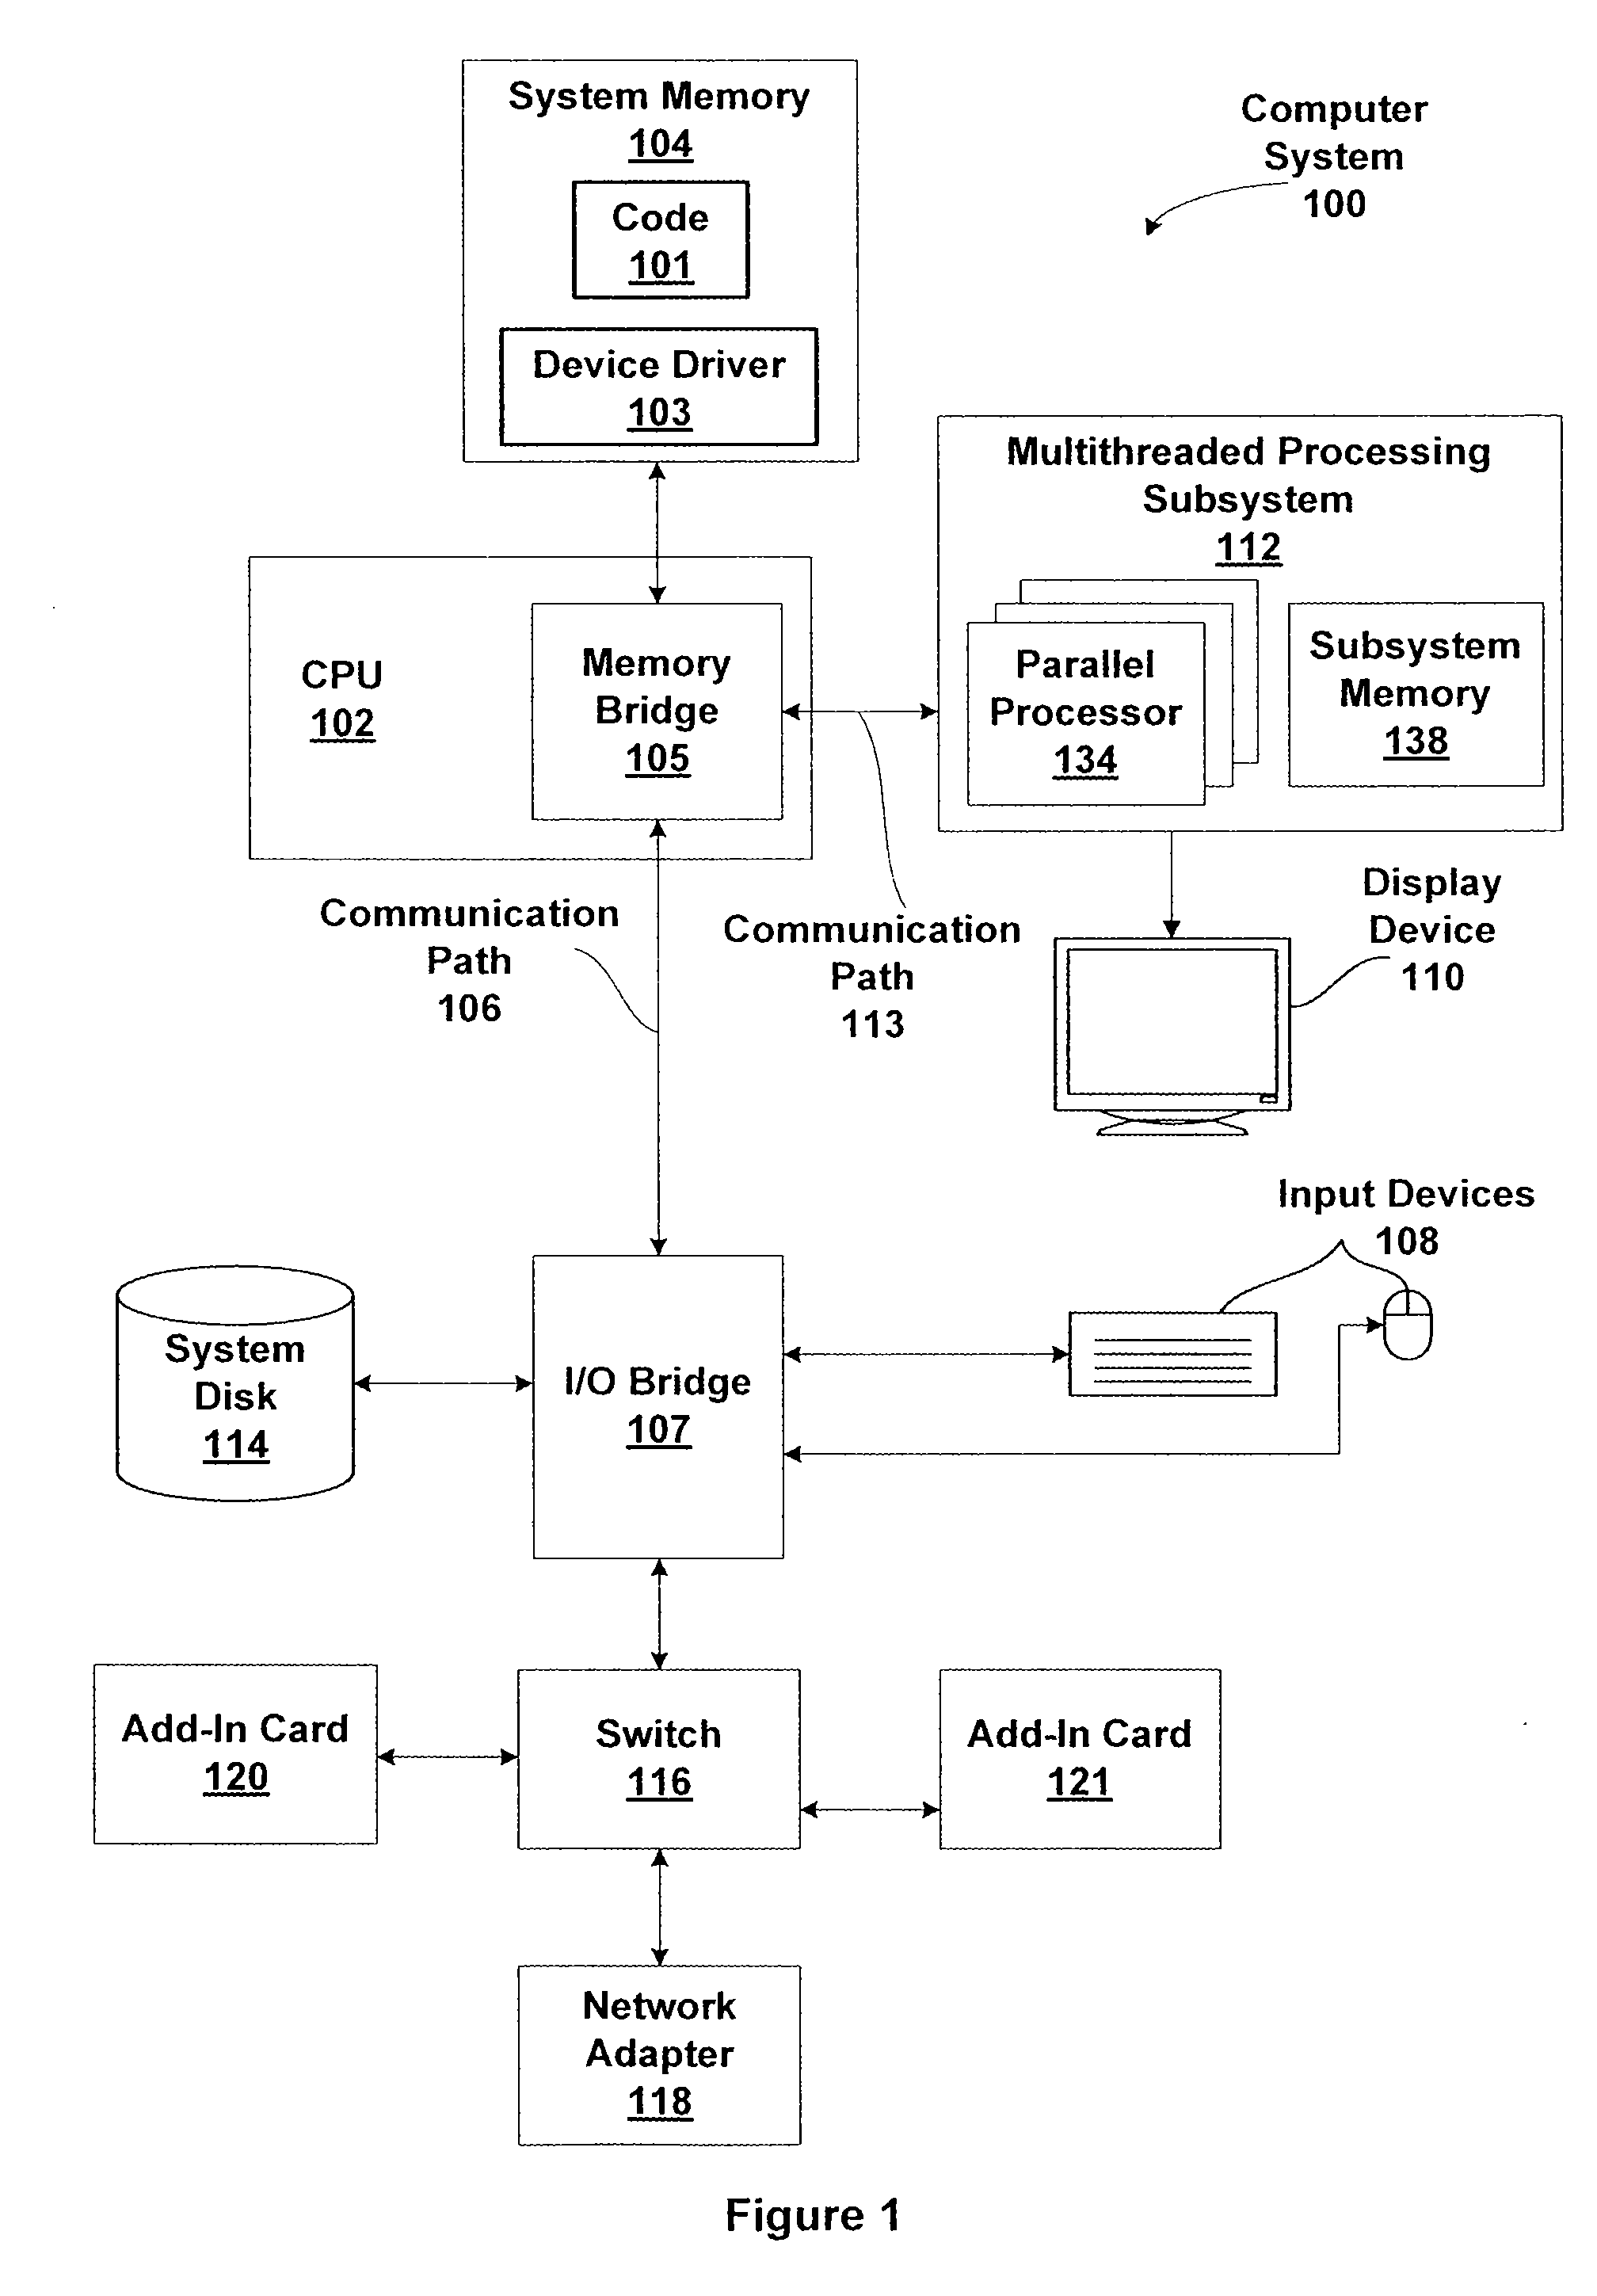 Variance analysis for translating cuda code for execution by a general purpose processor